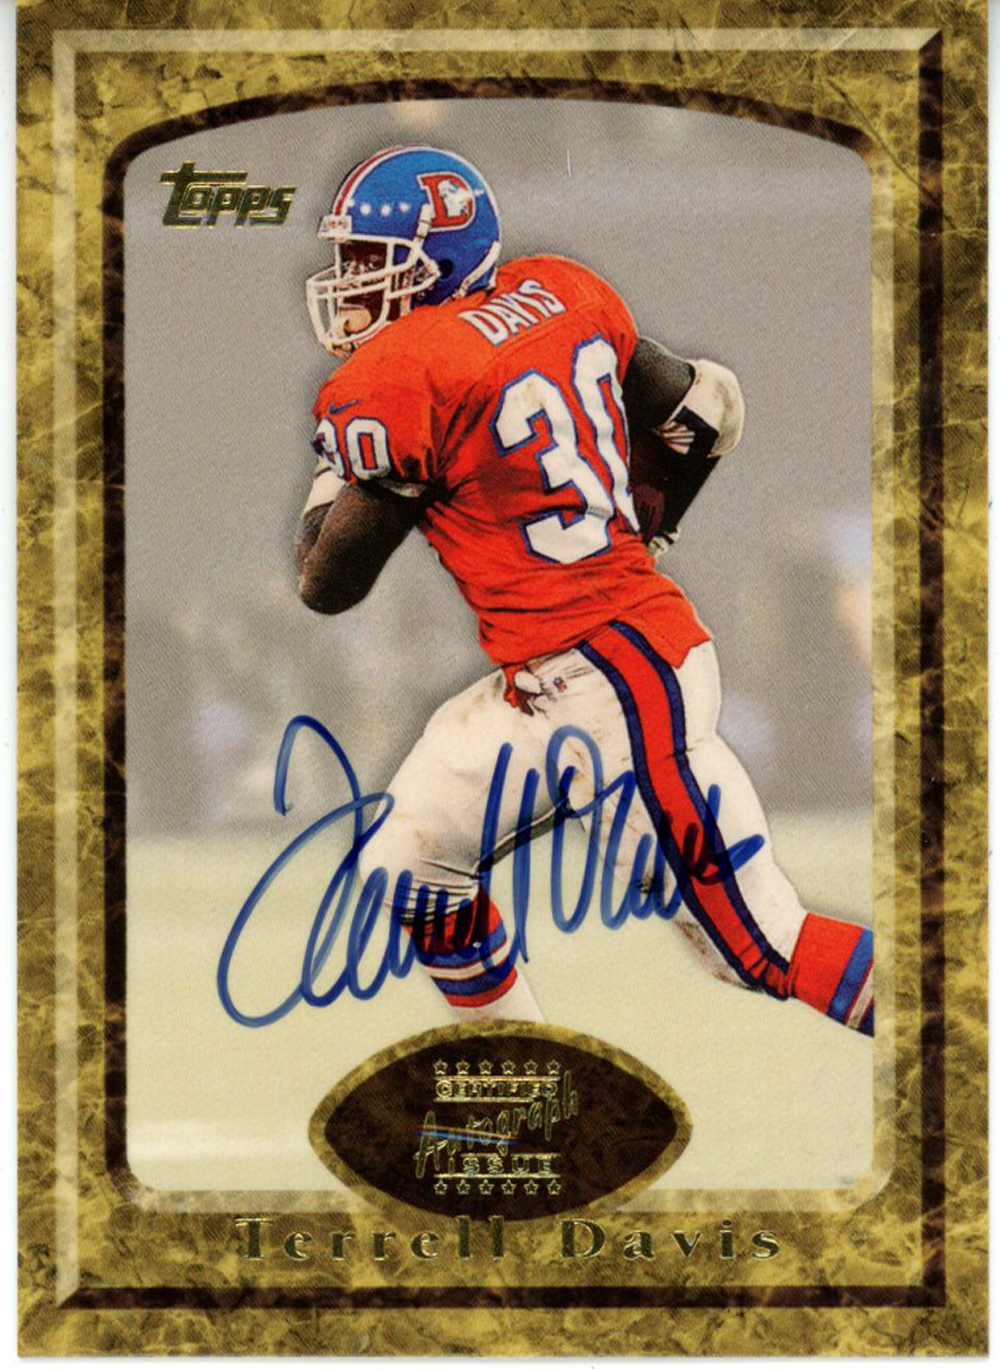 Terrell Davis Autographed 1997 Topps Certified Trading Card